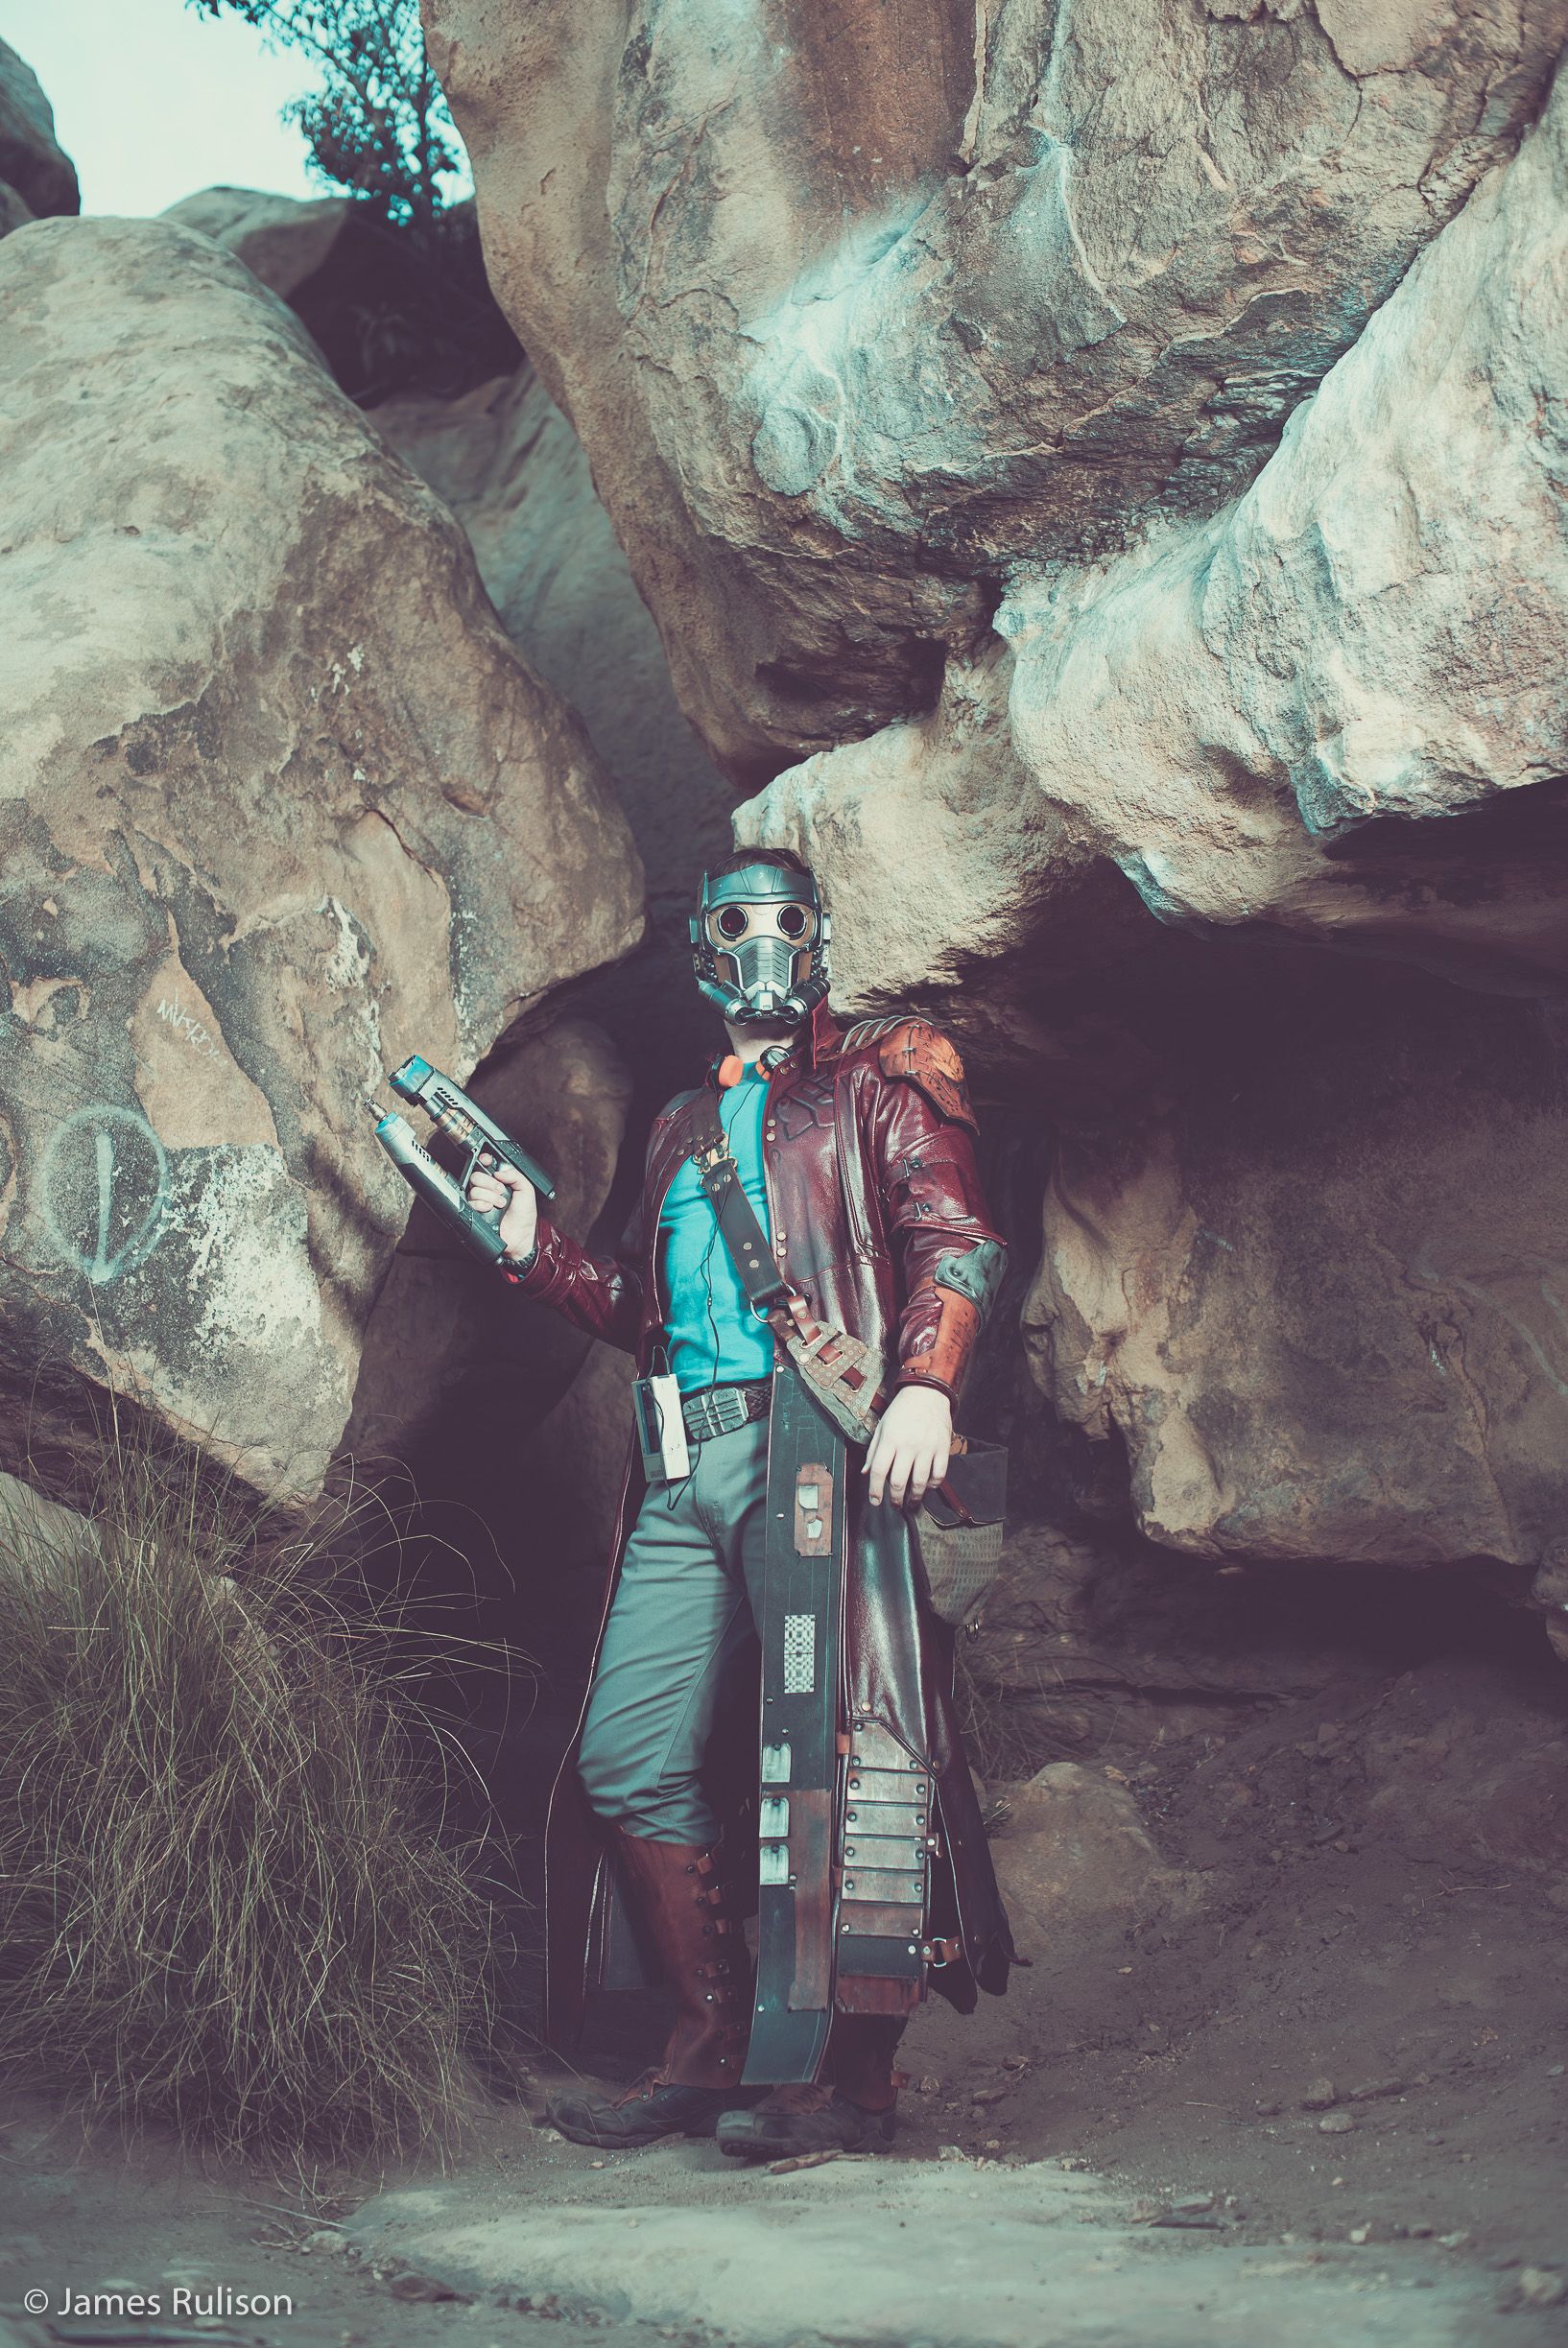 Star Lord shoot with Americo